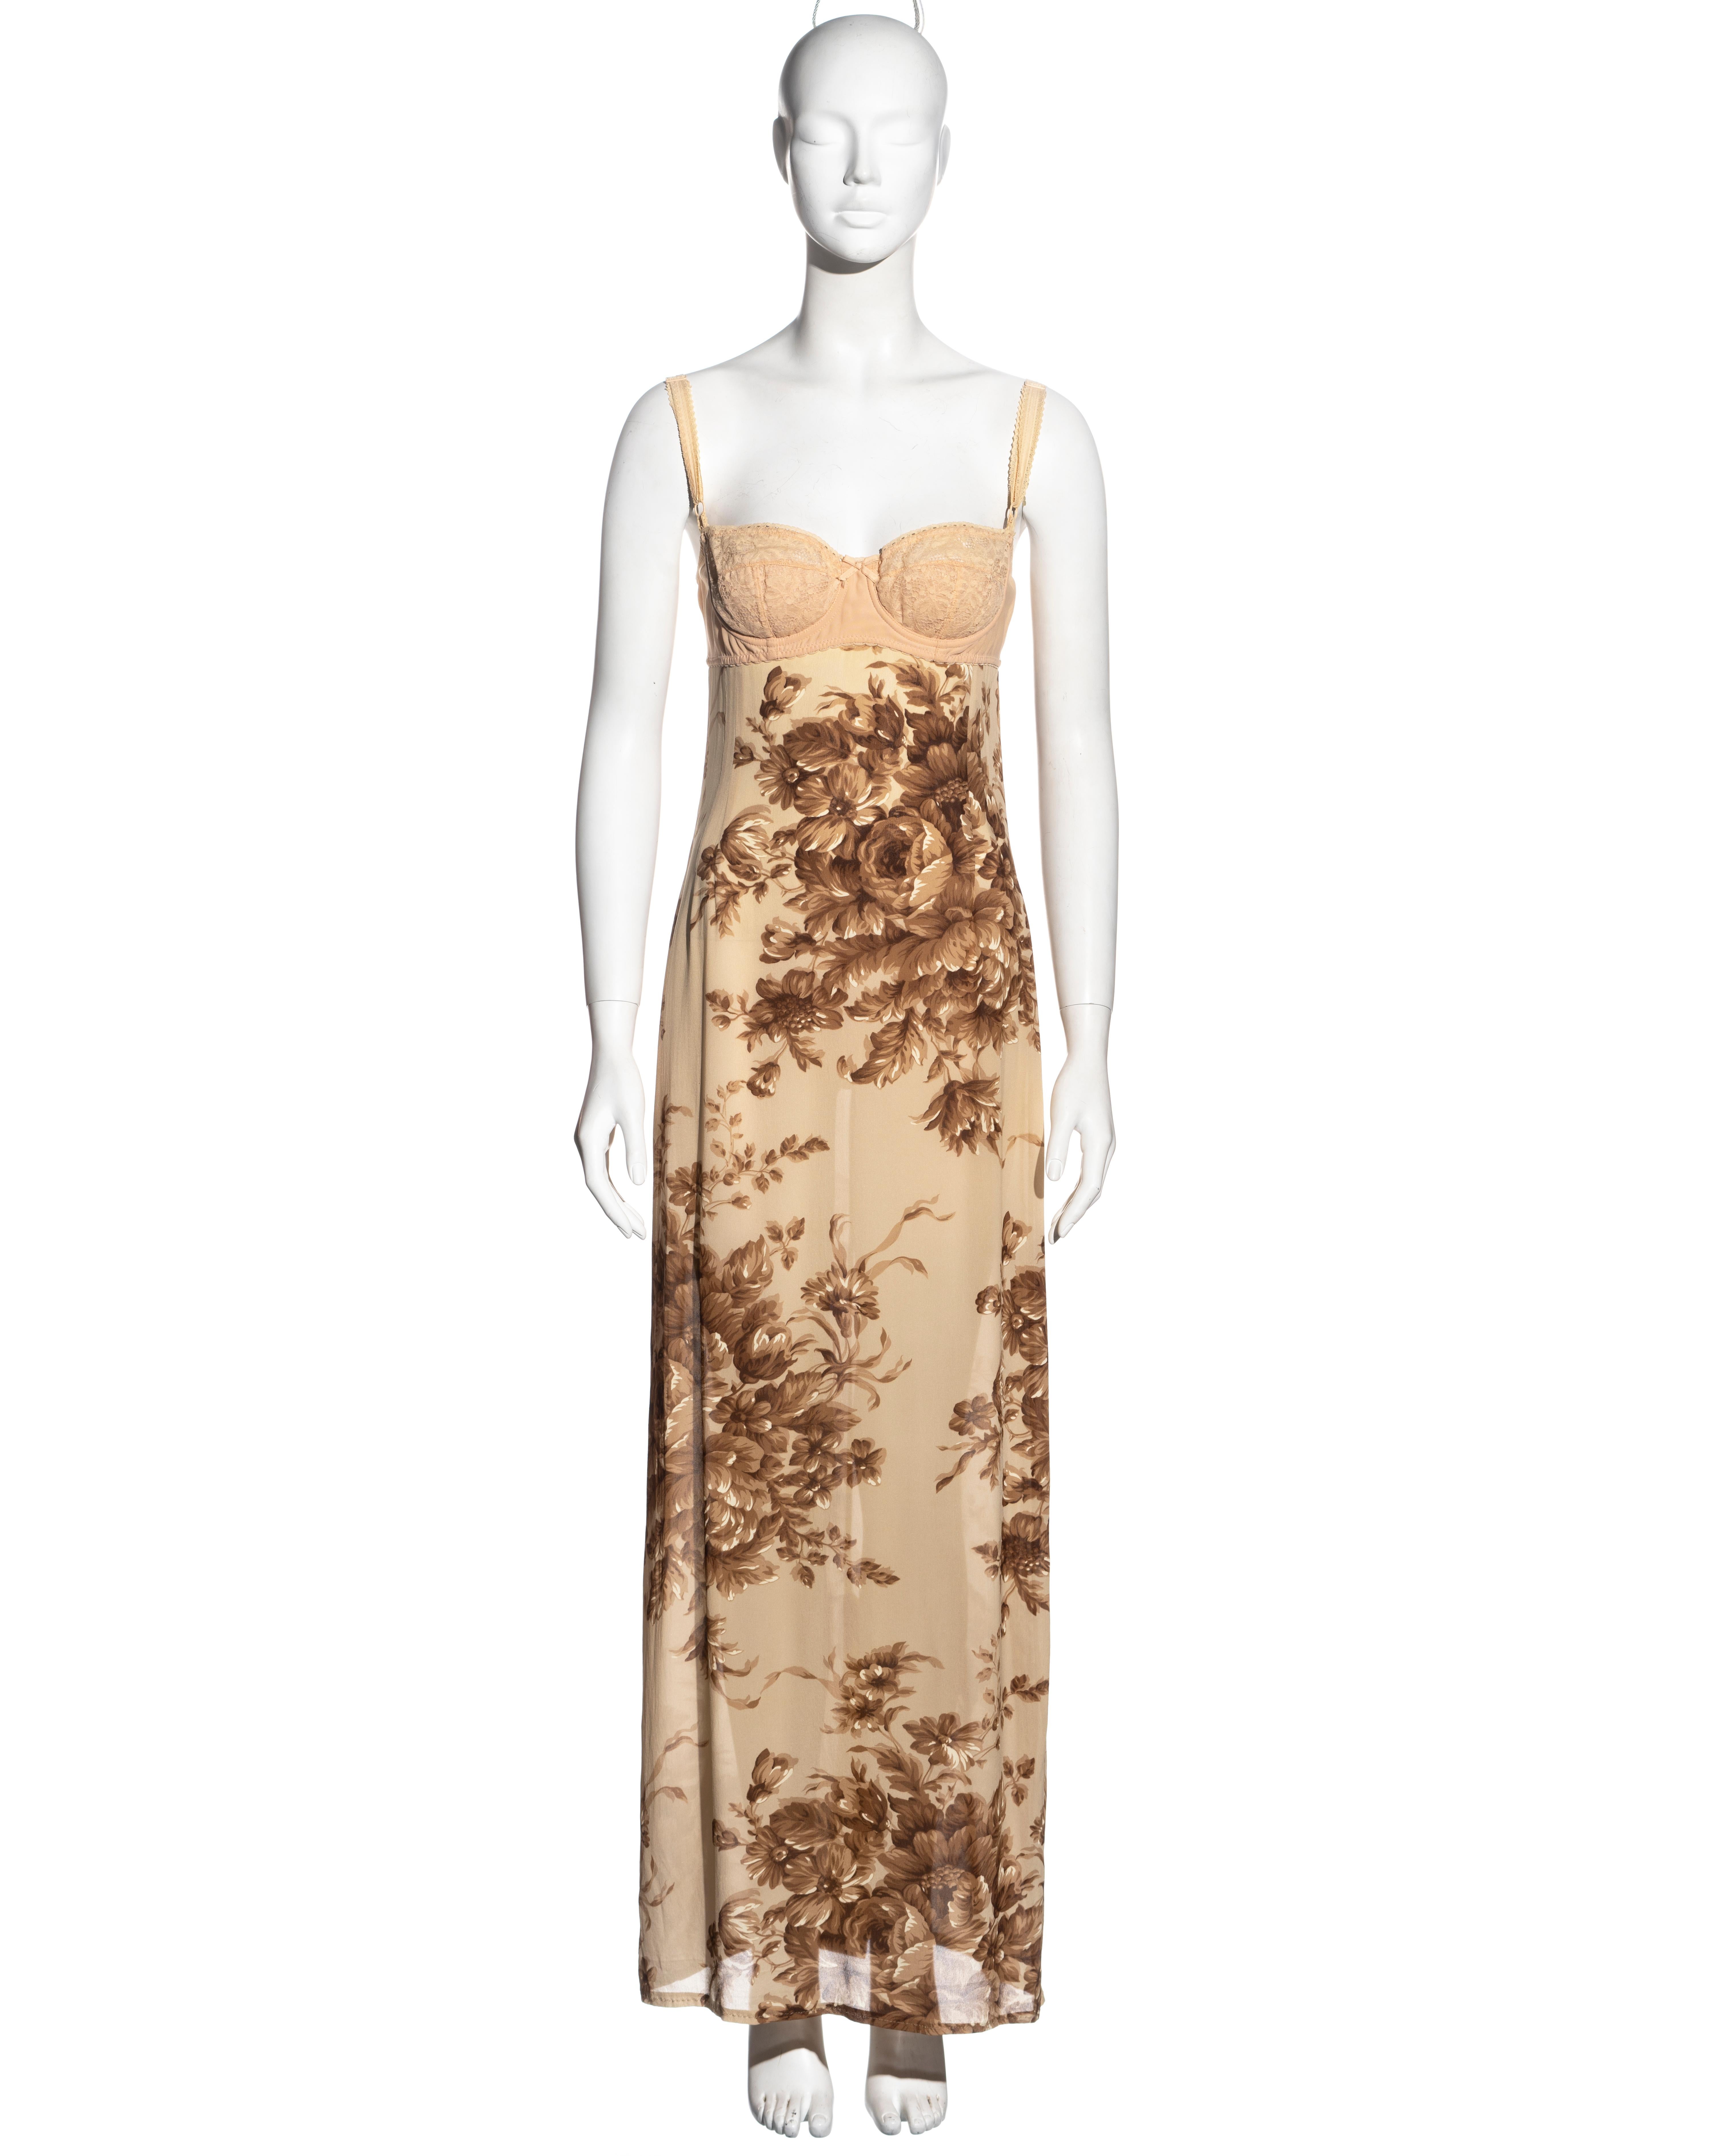 ▪ Vintage Dolce & Gabbana slip dress 
▪ Cream and brown floral silk 
▪ Integrated lace and spandex bra with adjustable shoulder straps 
▪ String ties fasten at the back 
▪ Maxi length 
▪ IT 40 - FR 36 - UK 8
▪ Spring-Summer 1997
▪ 96% Silk, 4% Lycra